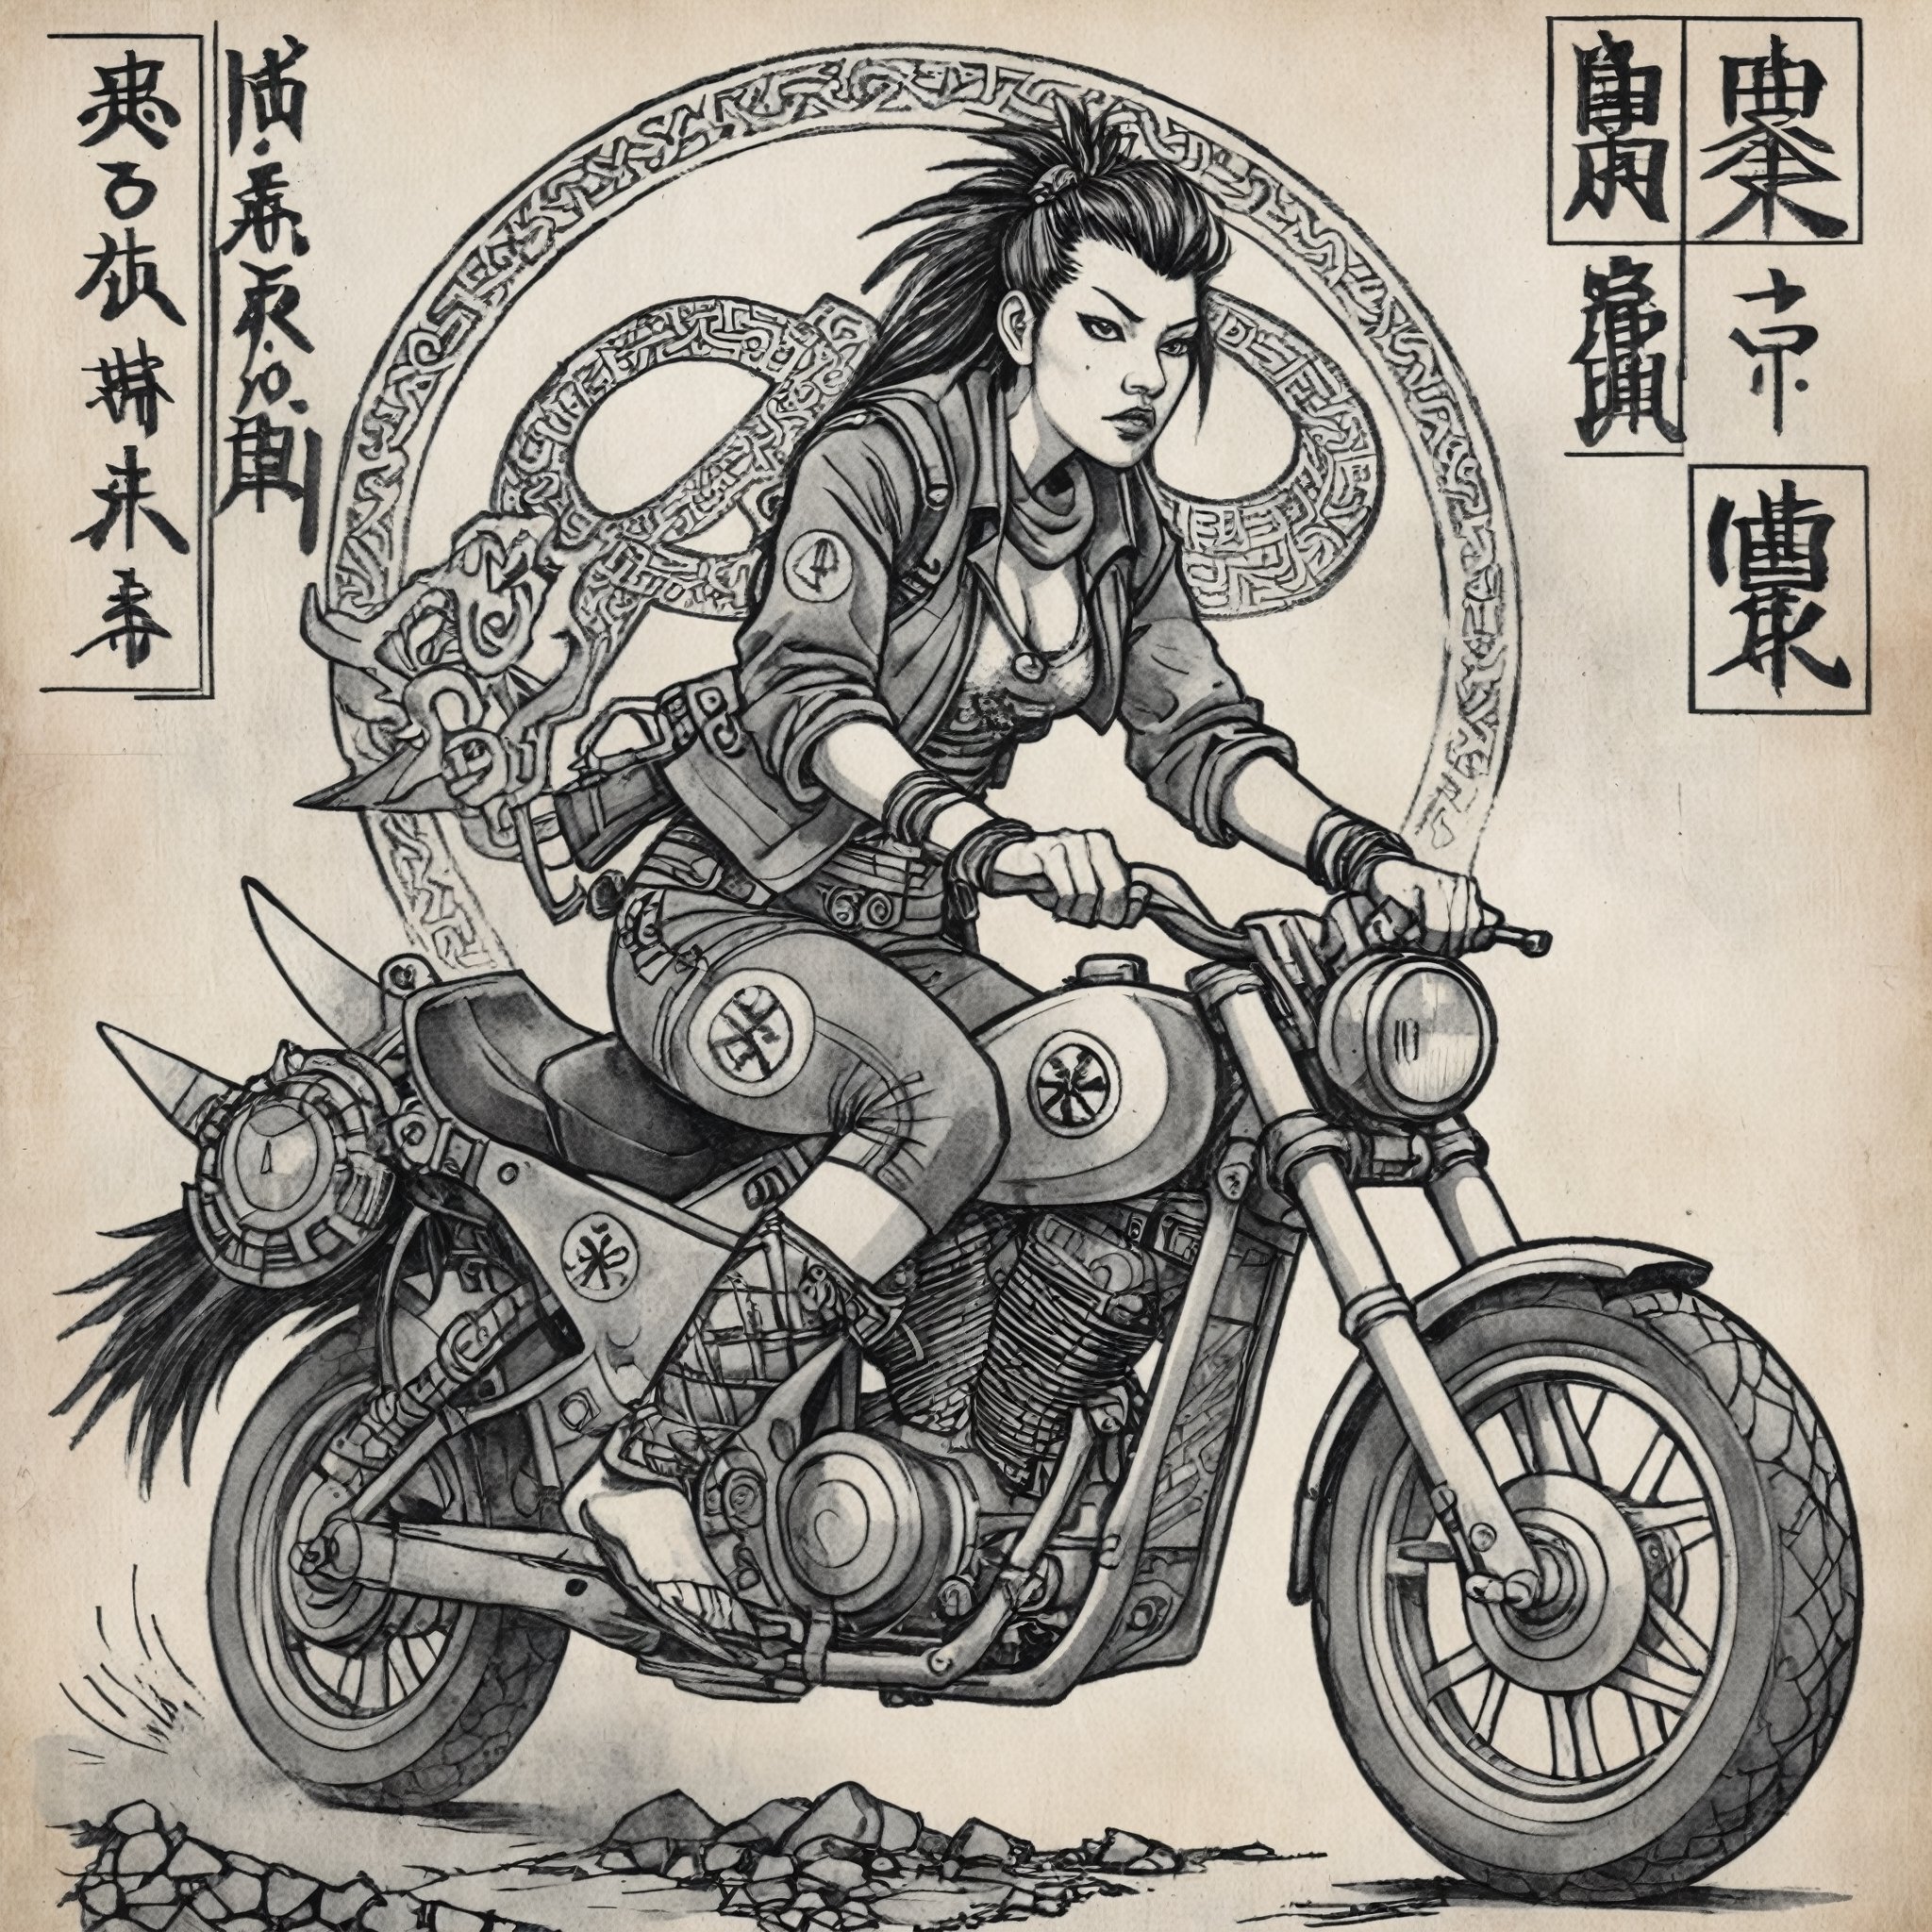  Lobo comic  style  ukiyo-e, of a  punk woman , wearing post apocalyptic outfit  driving on a motorcycle, epic light, post apocalyptic background ,Ukiyo-e, knotwork, runes